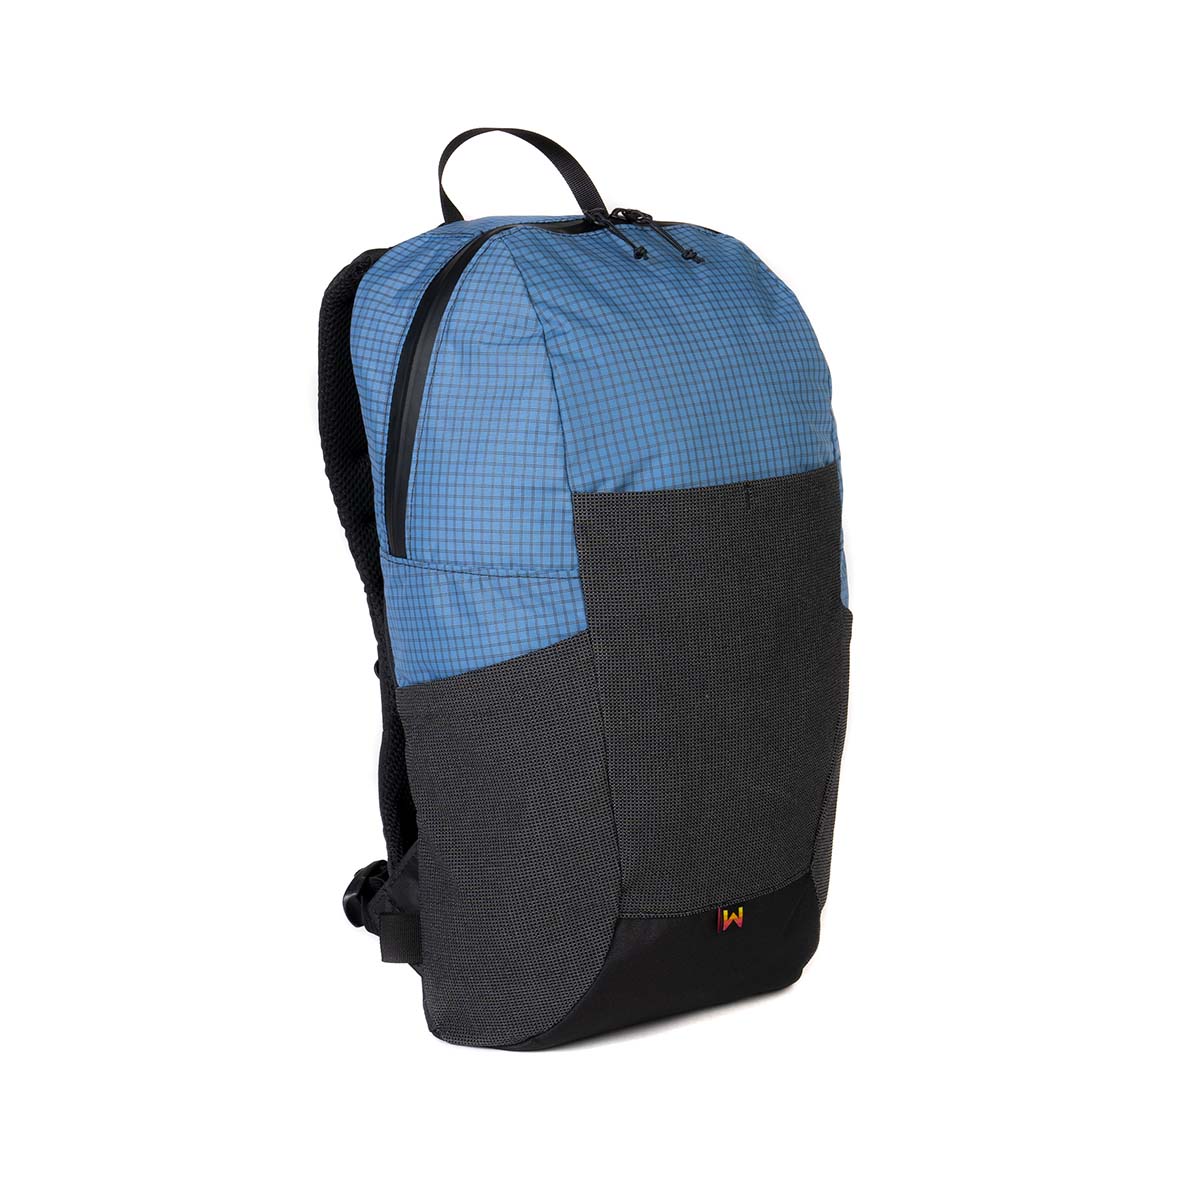 Buy Skybags 30 Ltrs Black Medium Laptop Backpack Online At Best Price @  Tata CLiQ